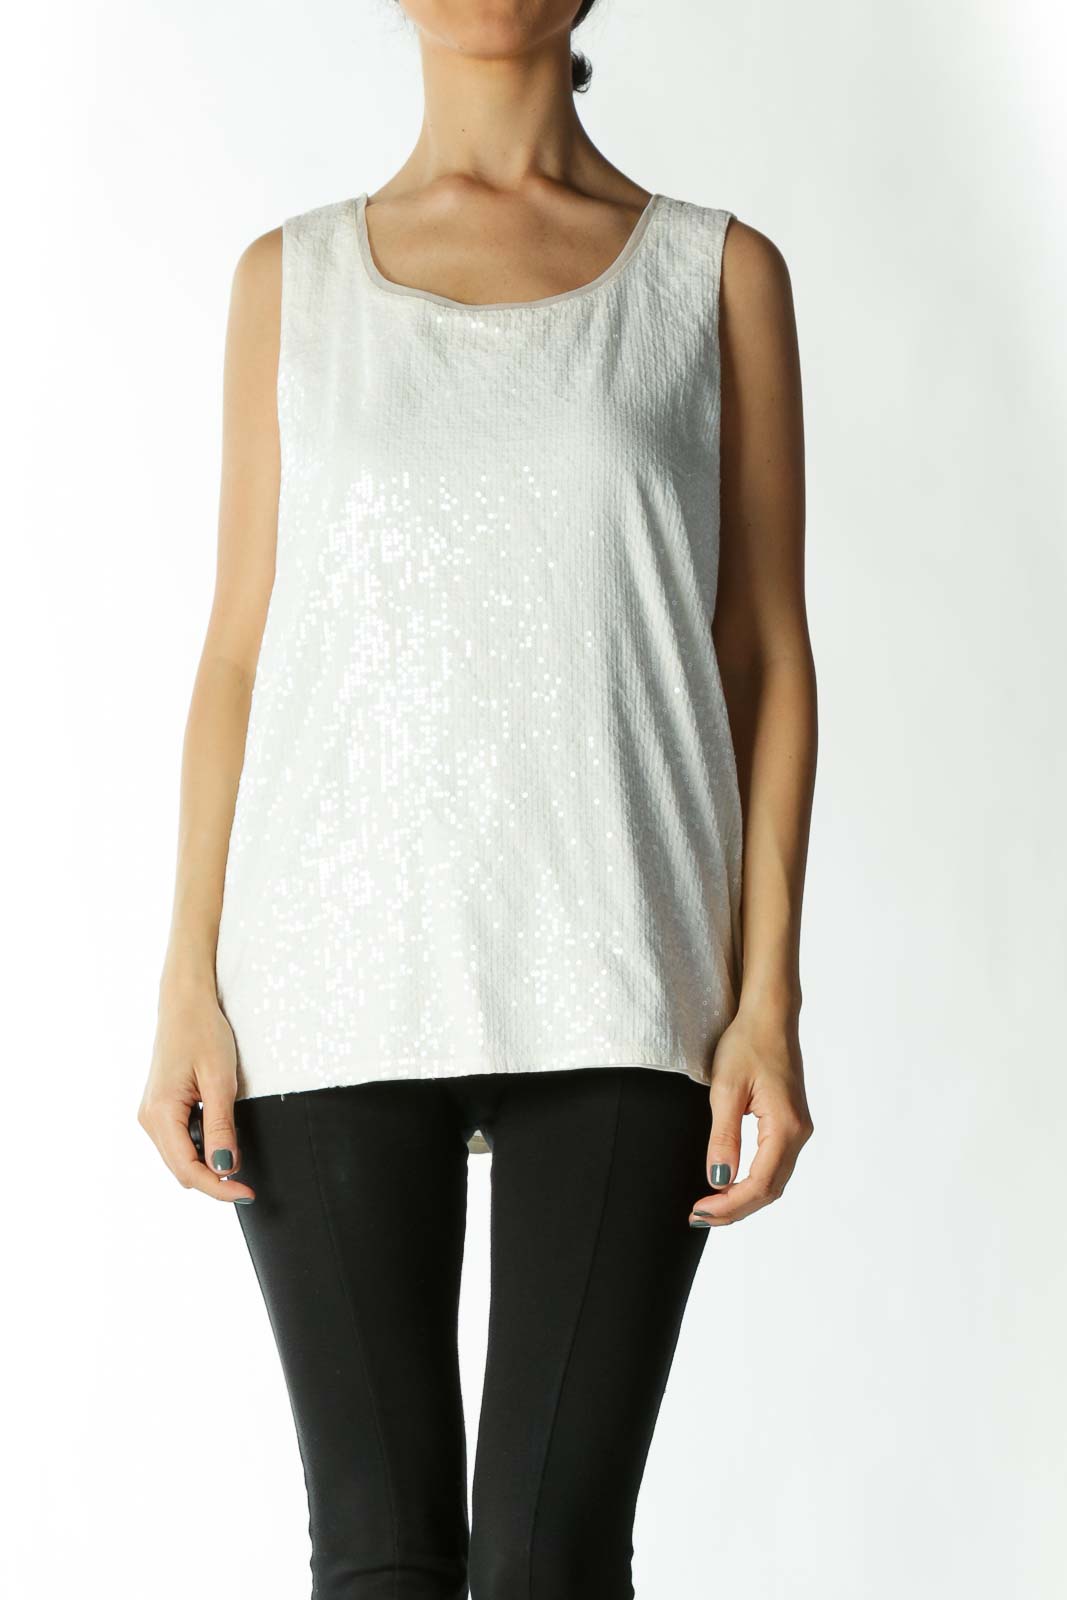 White Sequined Shirt Front